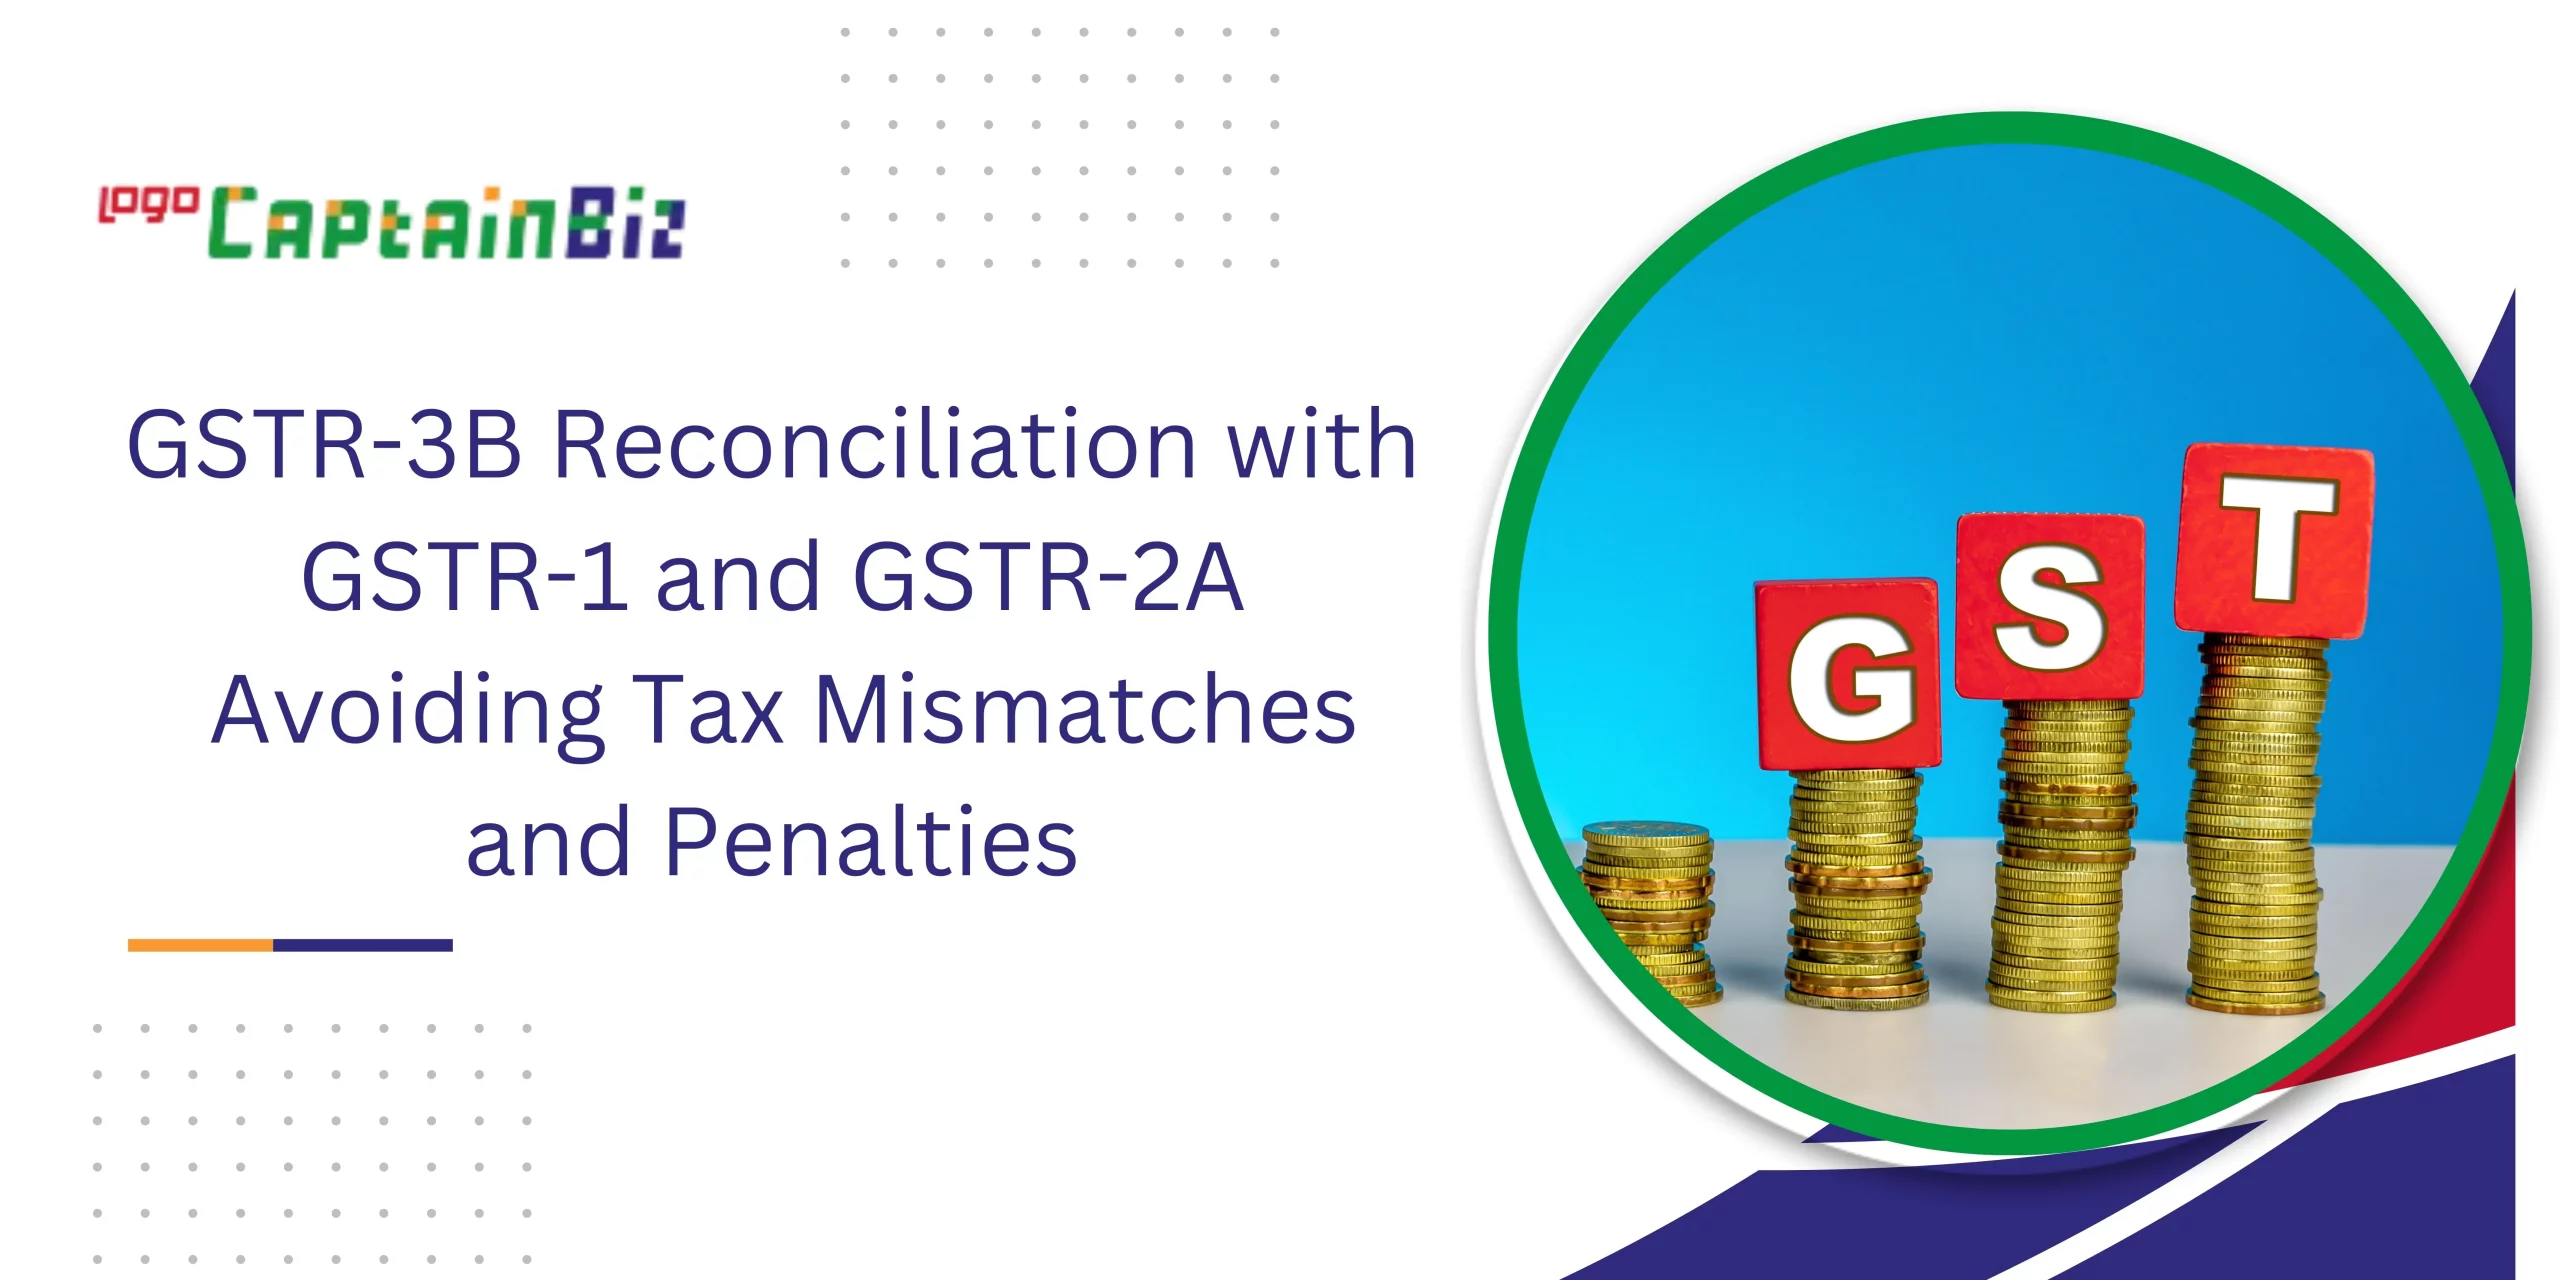 captainbiz gstr b reconciliation with gstr and gstr a avoiding tax mismatches and penalties